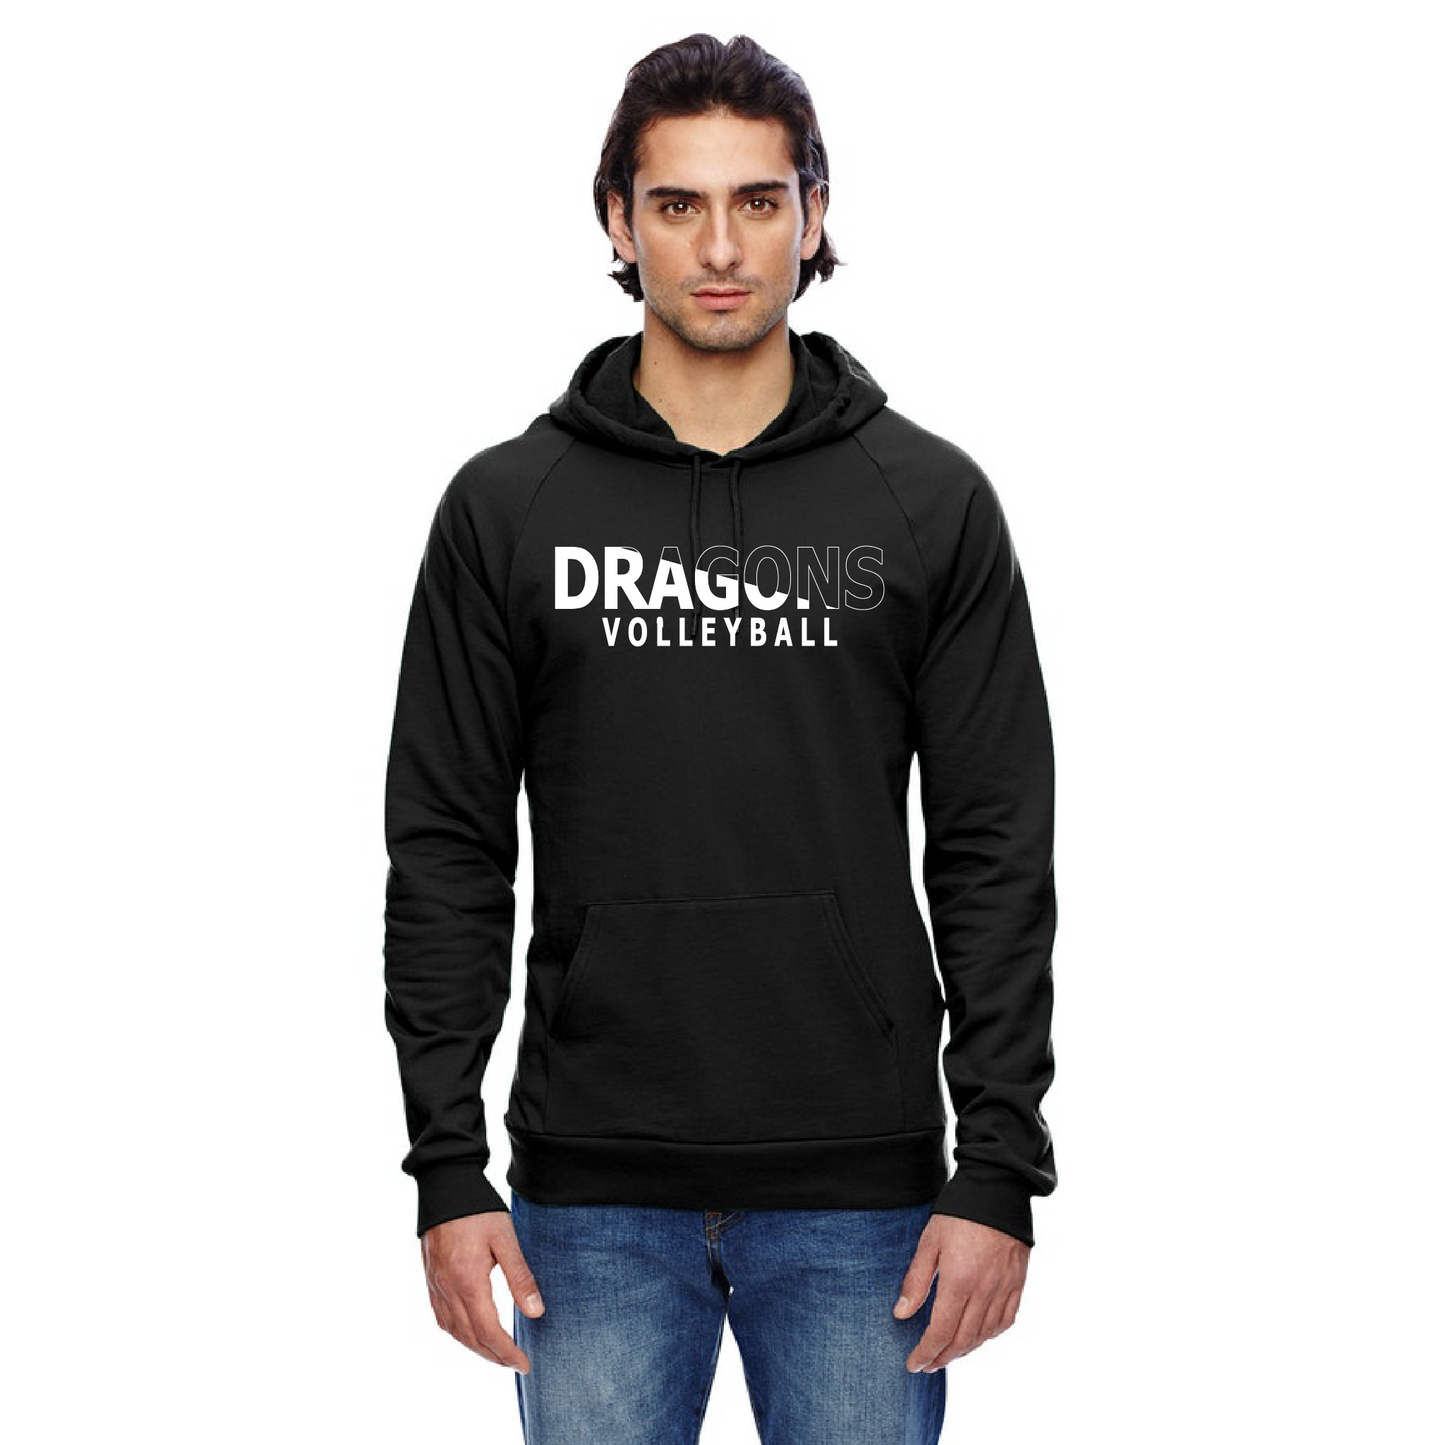 Unisex Hoodie - Dragons Volleyball Slashed White